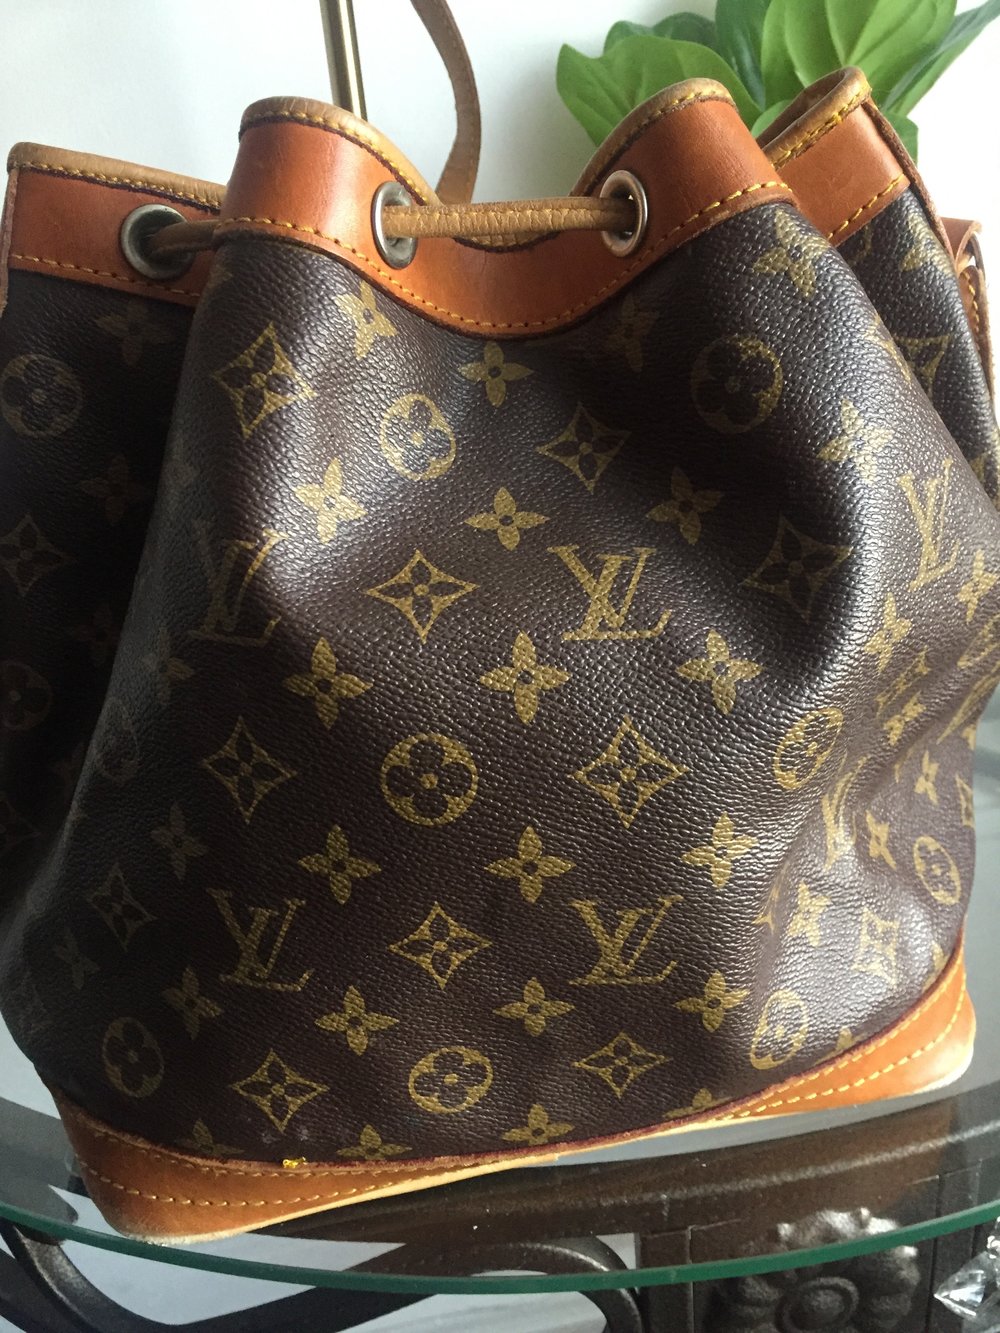 Sold at Auction: (2) VINTAGE LOUIS VUITTON NOE DRAWSTRING BAGS